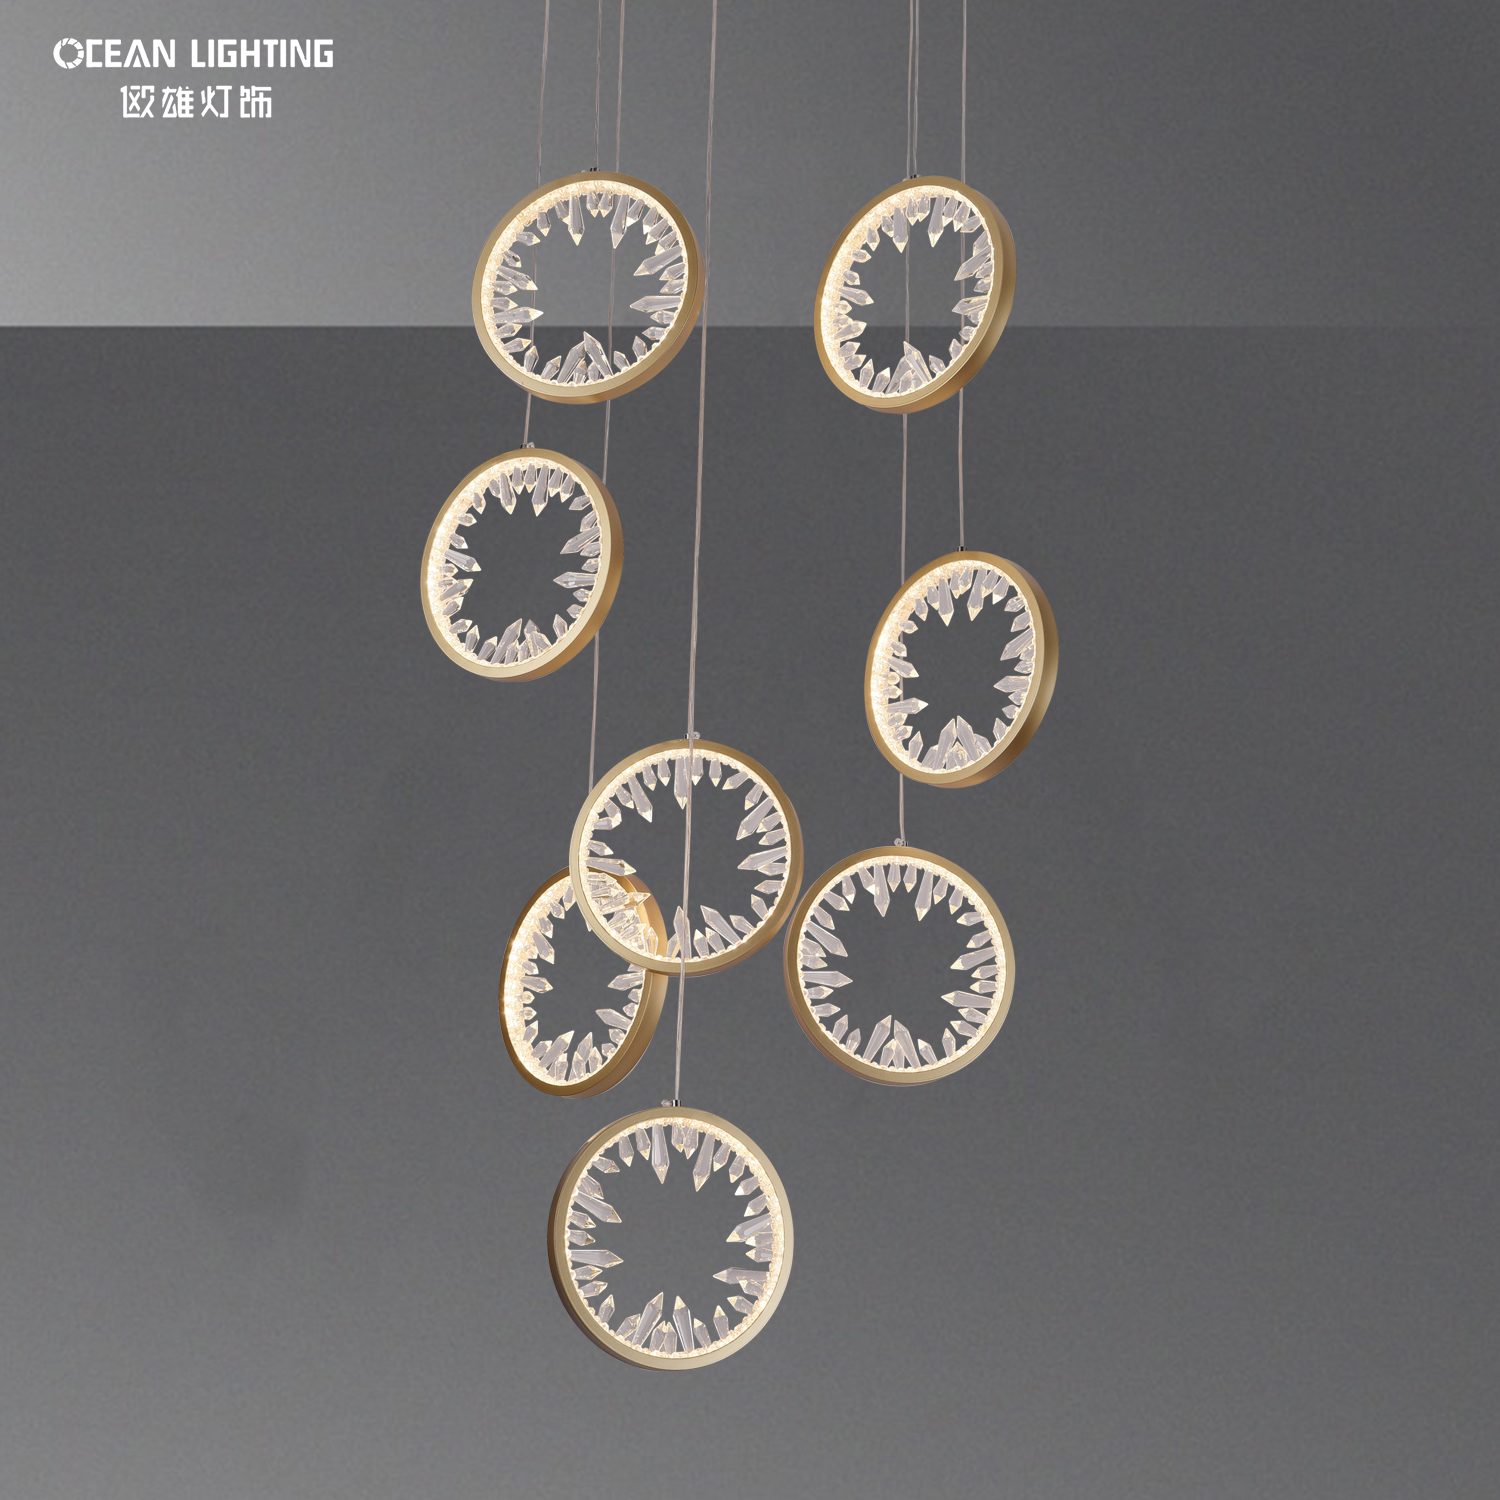 OCEAN LAMP Acrylic Crystal Ring Fixtures Stairs Decorative Hanging Lights Dining Pendant Light